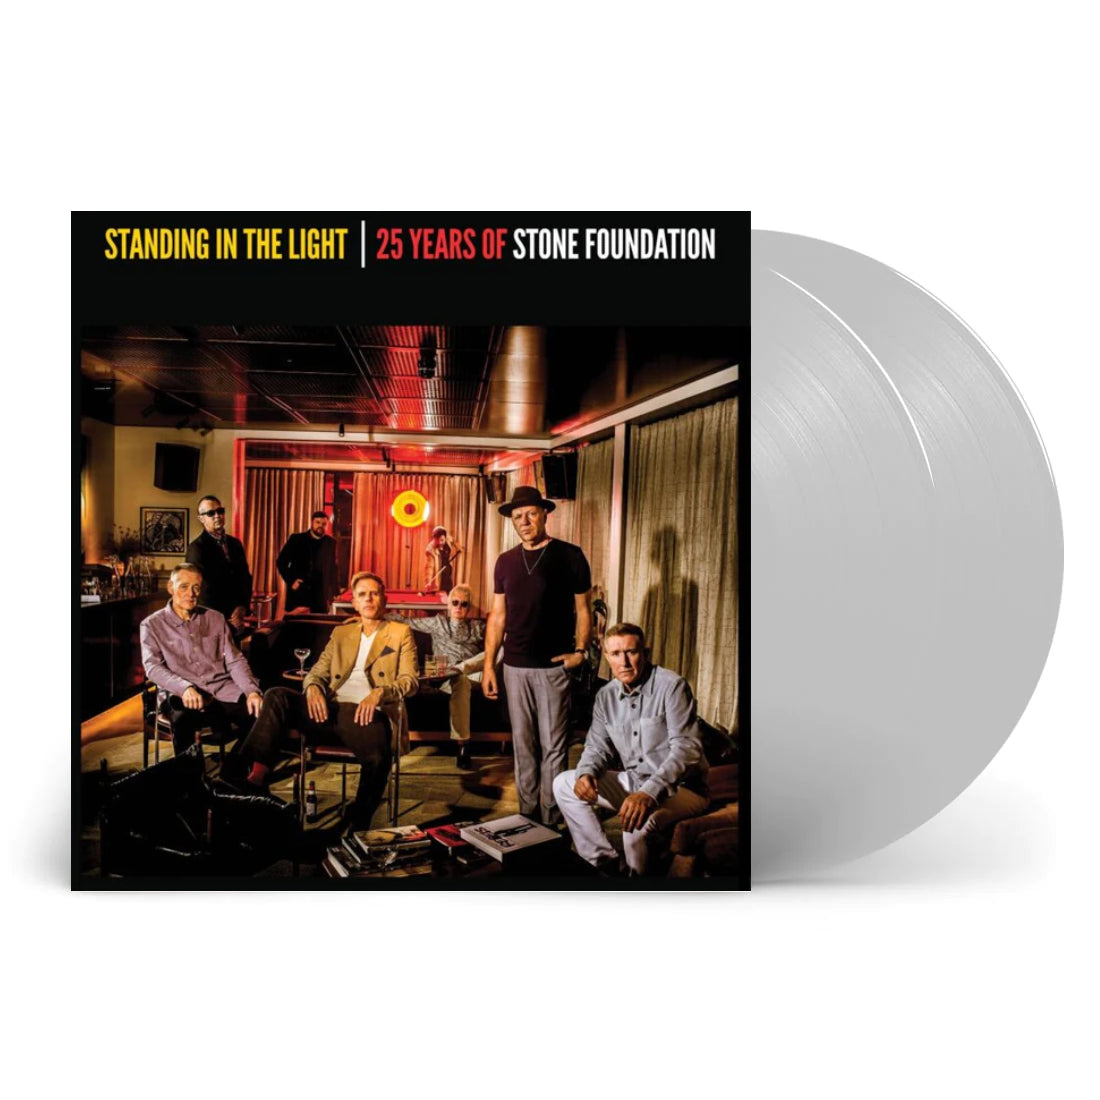 Standing In The Light - 25 Years Of Stone Foundation: Limited Clear Vinyl 2LP + Signed Print